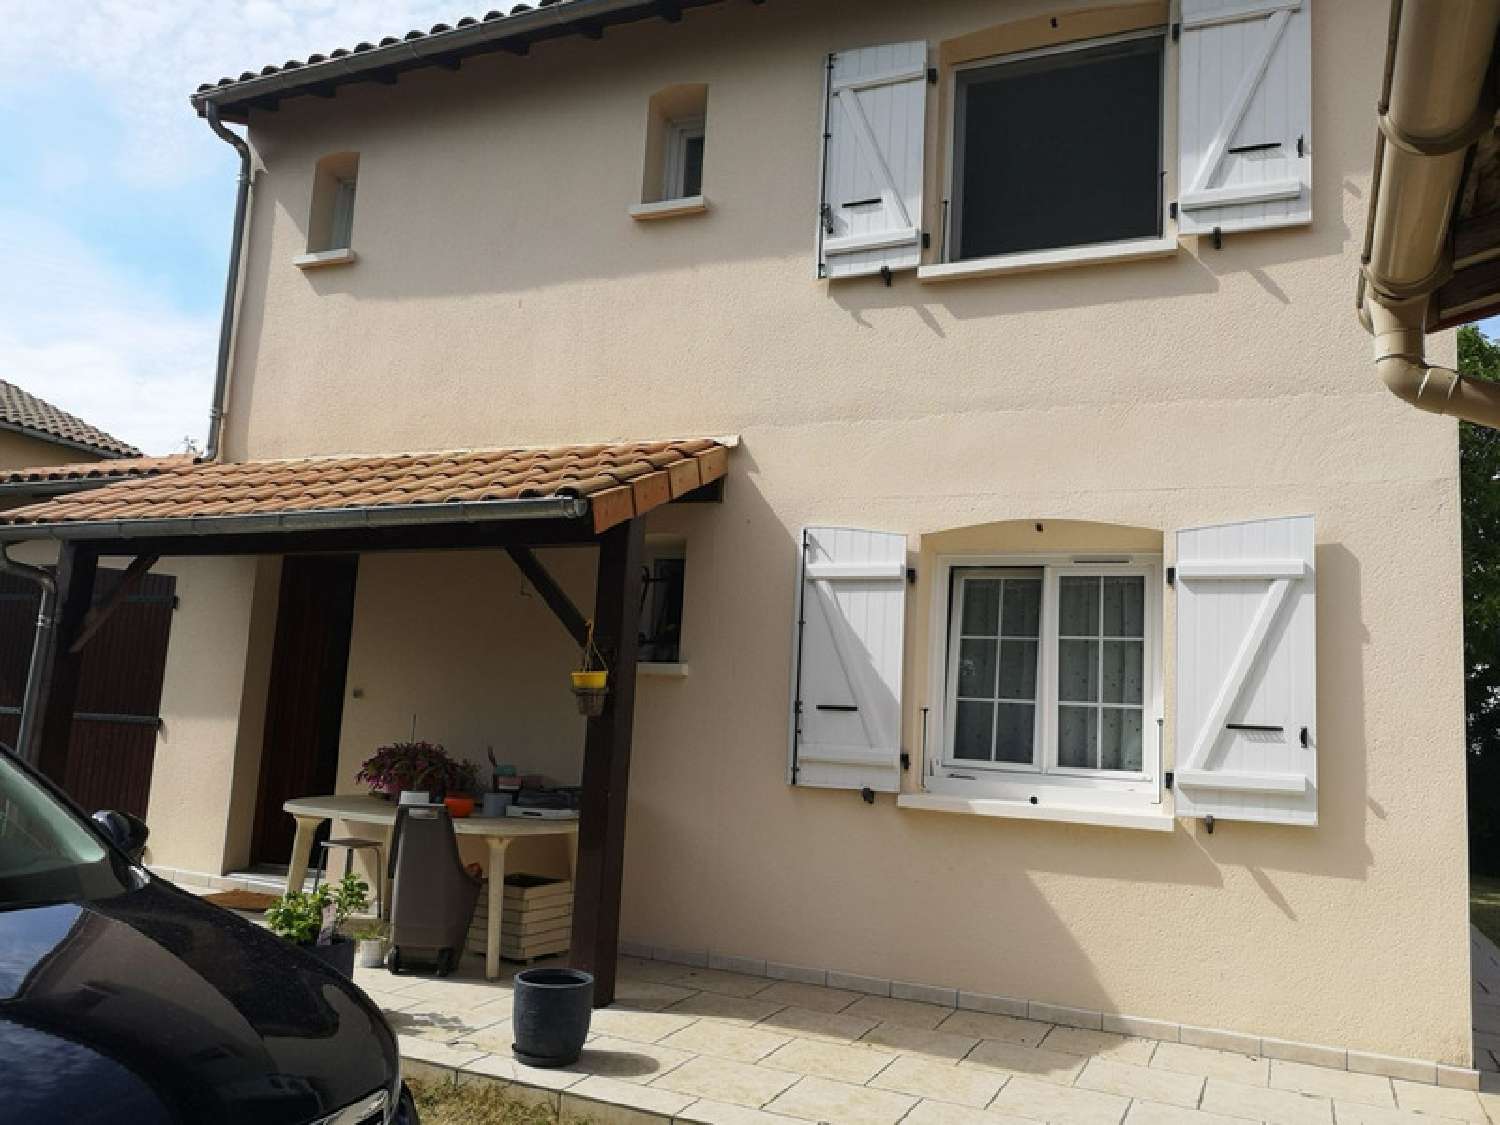  for sale house Buxerolles Vienne 4